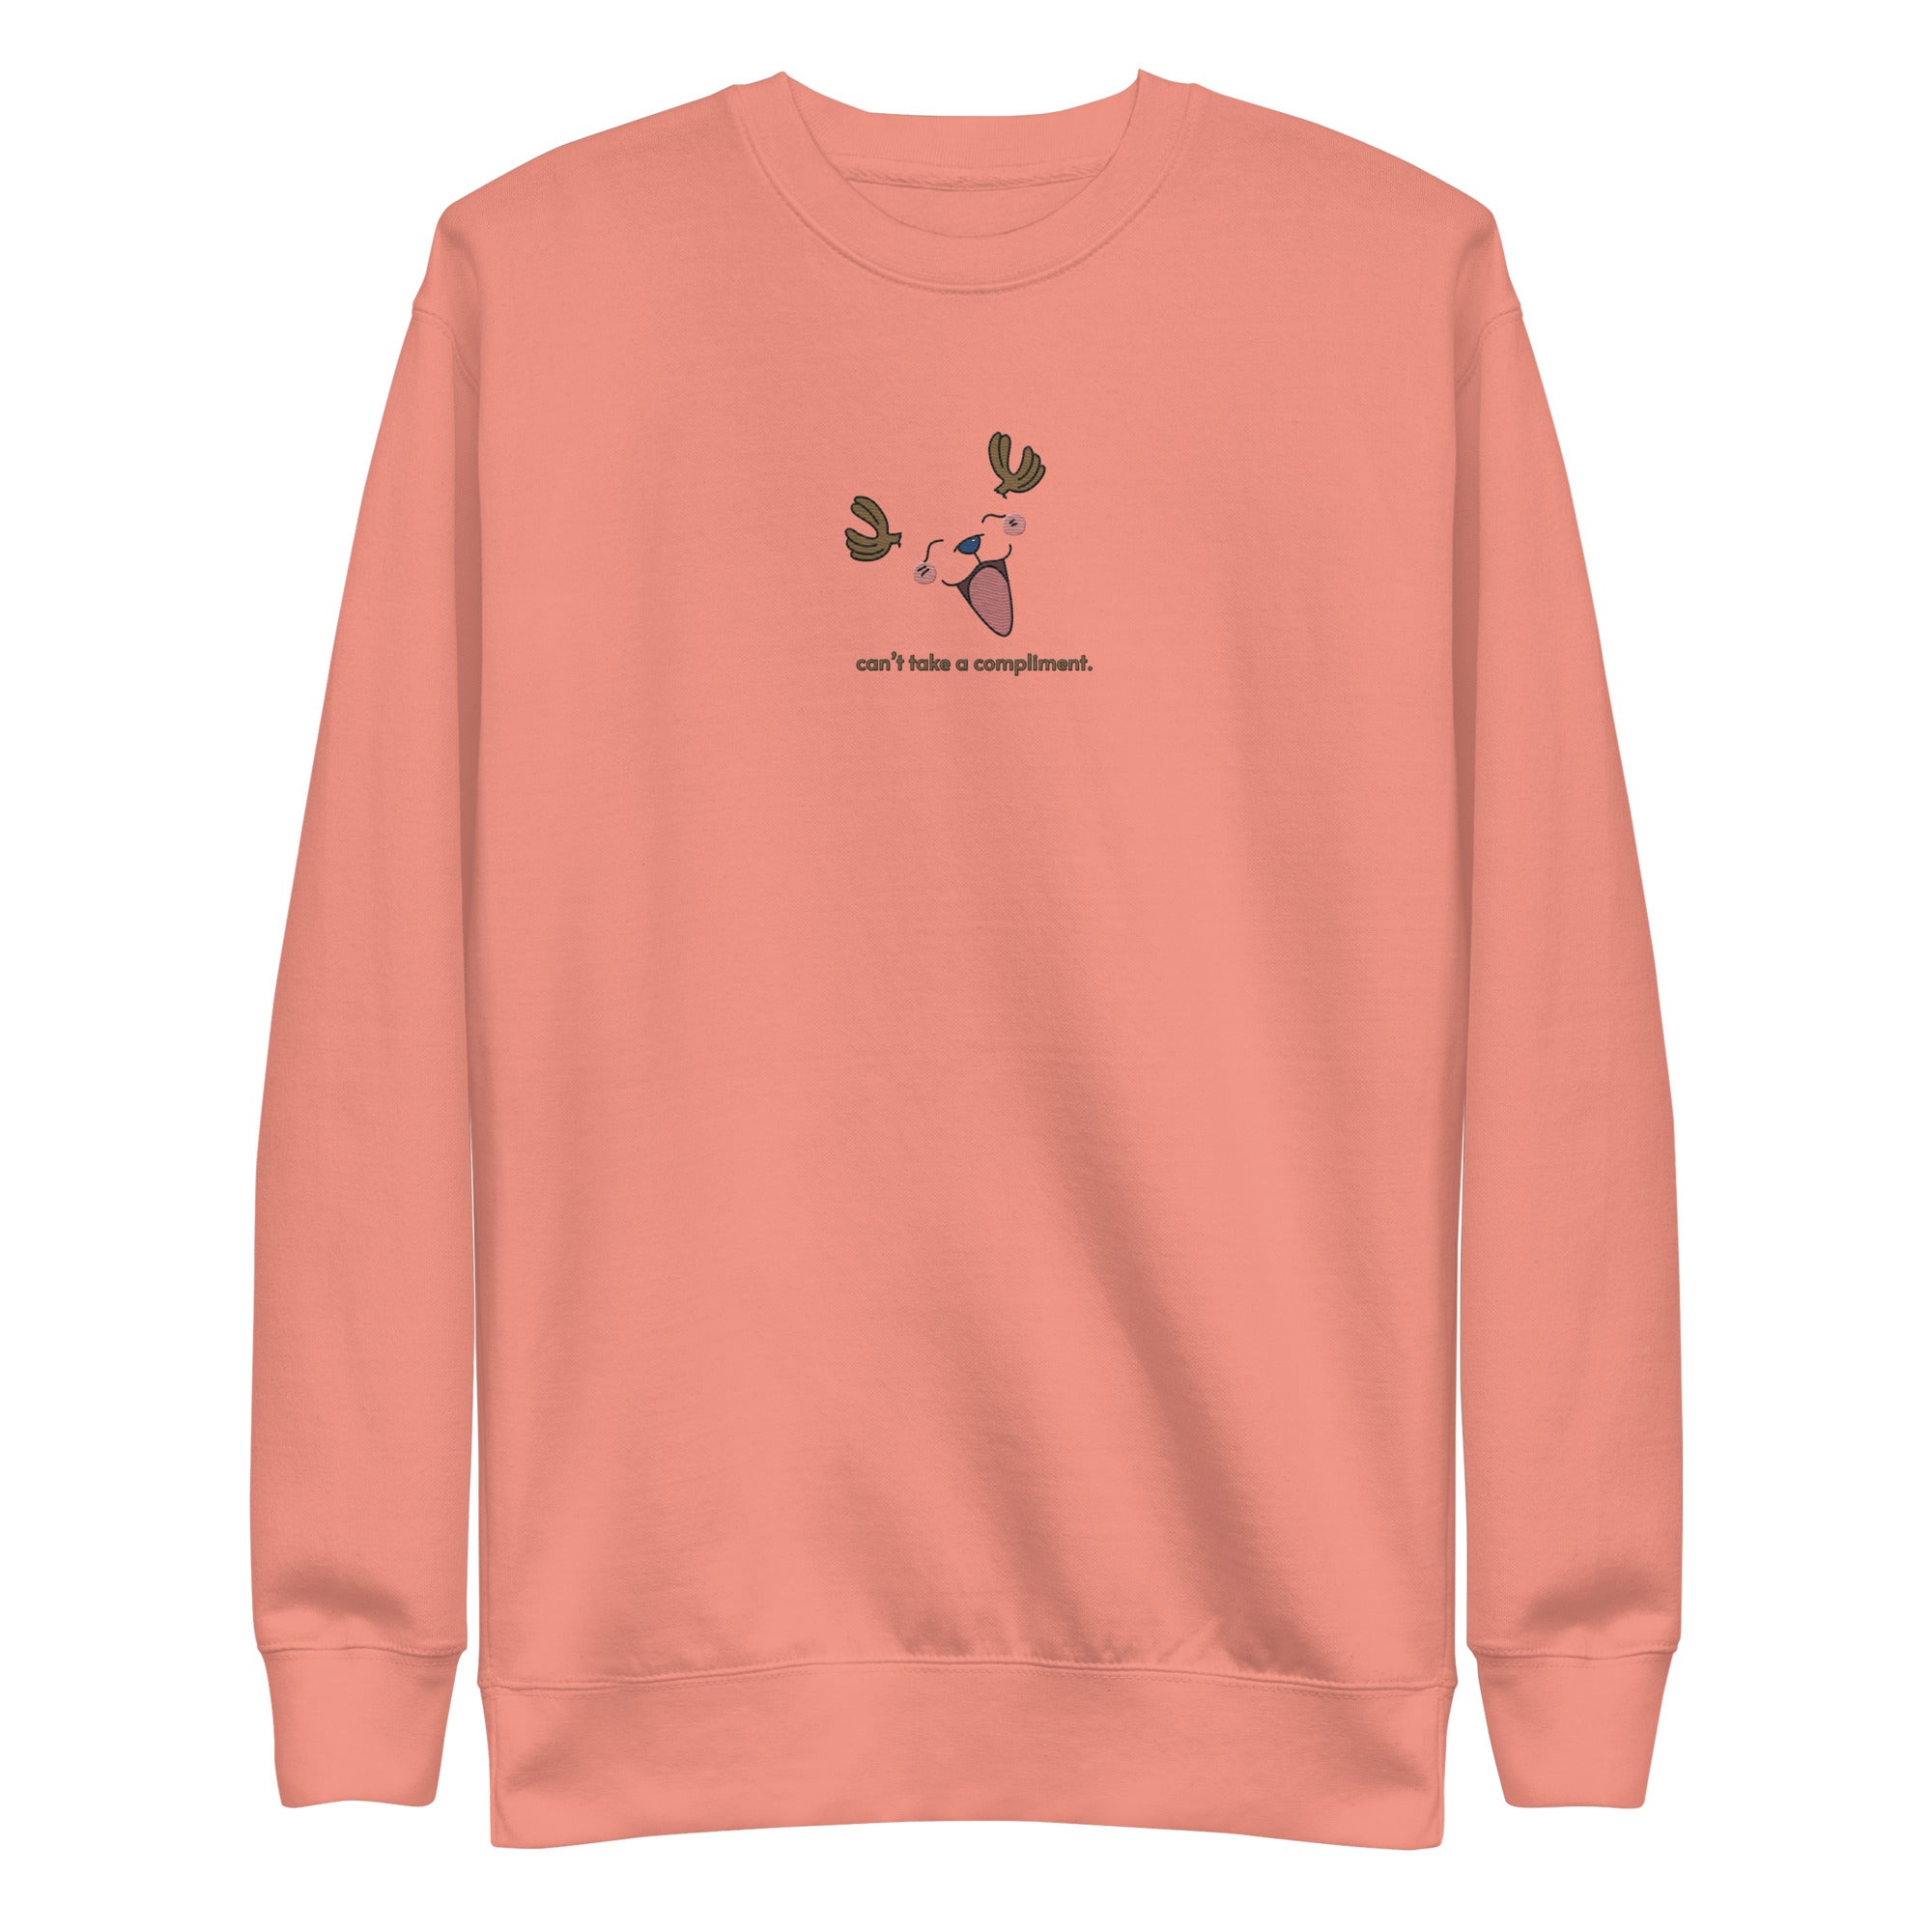 Chopper 'Can't Take a Compliment' Embroidered Premium Unisex Crewneck Anime Sweatshirt